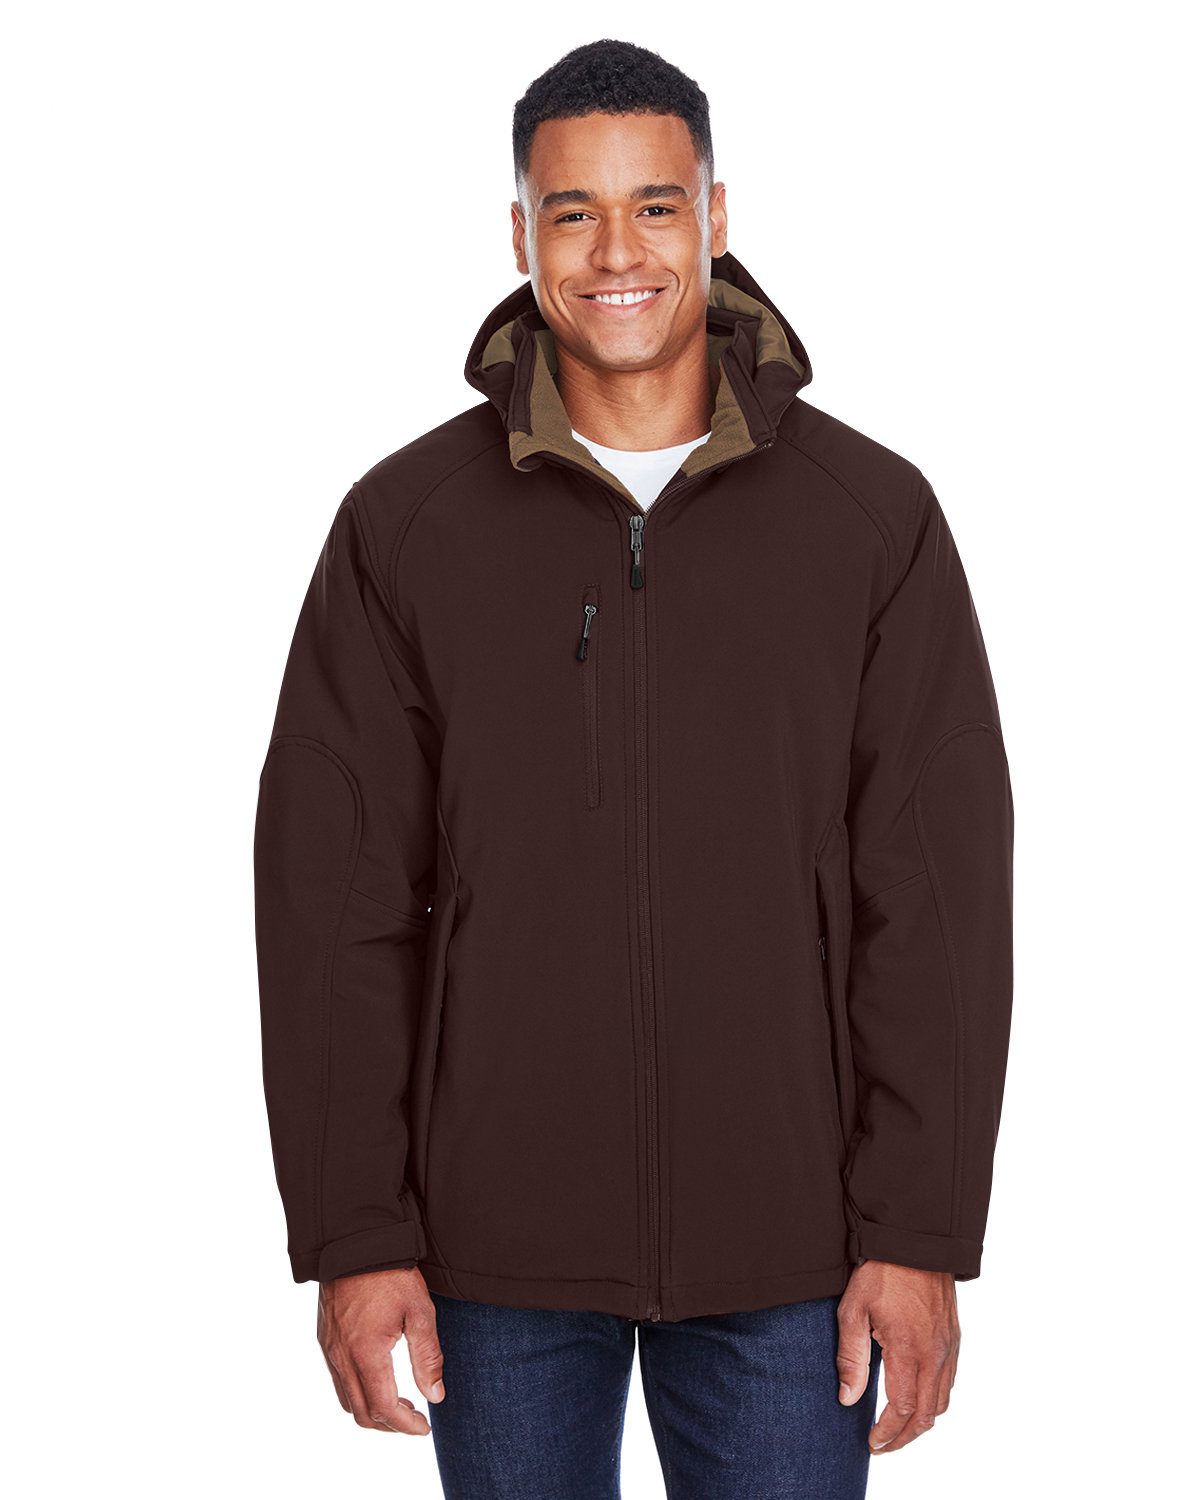 North End Men's Glacier Insulated Soft Shell Jacket #88159 Dark Chocolate